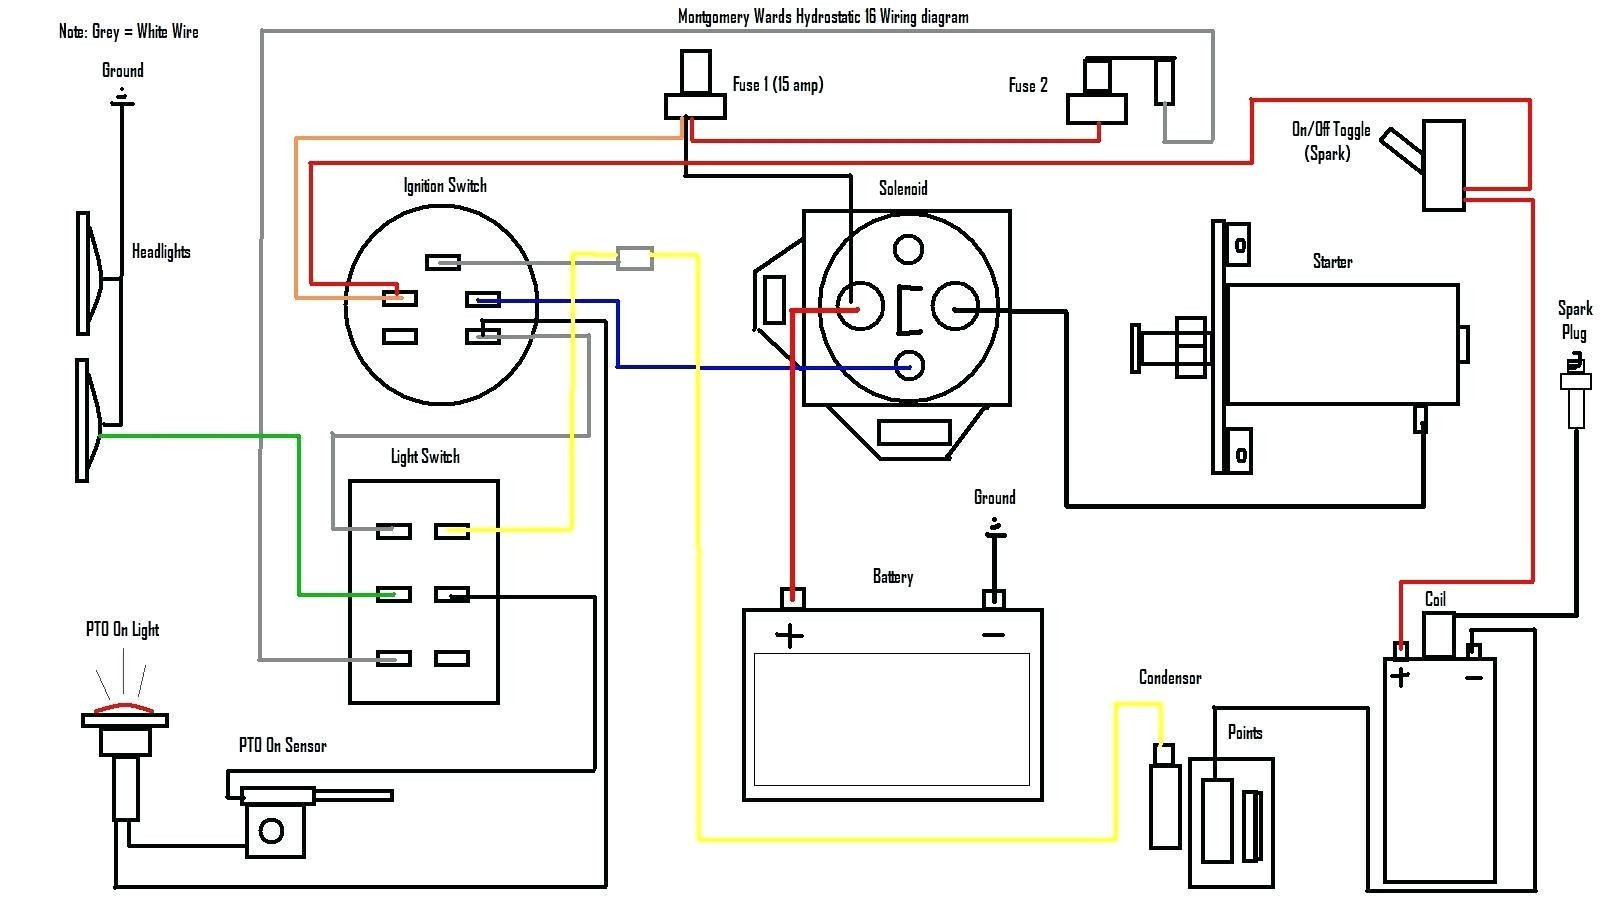 15 Hp Briggs And Stratton Wiring Diagram | Wiring Library - Briggs And Stratton V Twin Wiring Diagram